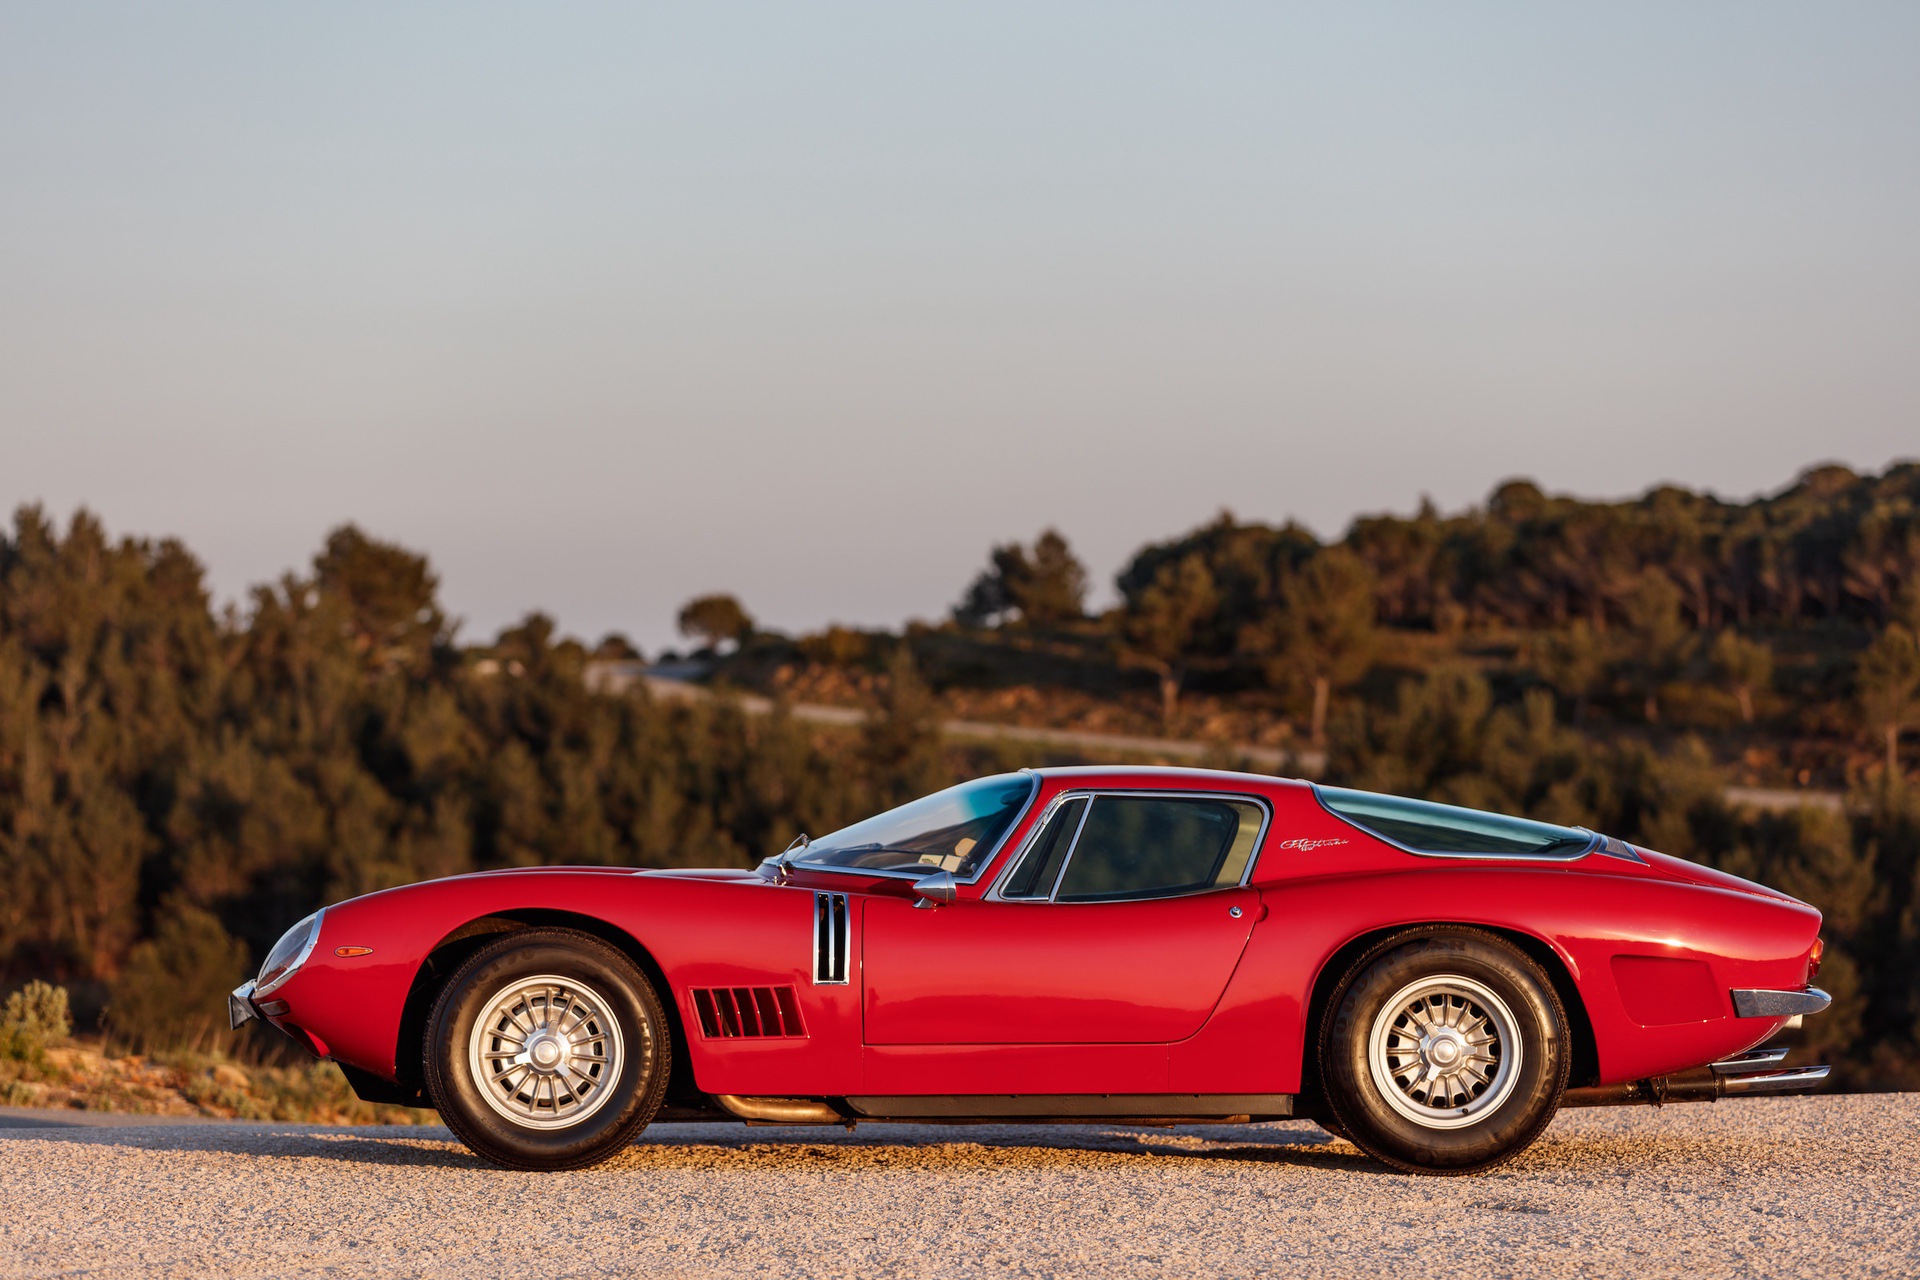 Red Bizzarrini 5300 GT on road at sunset